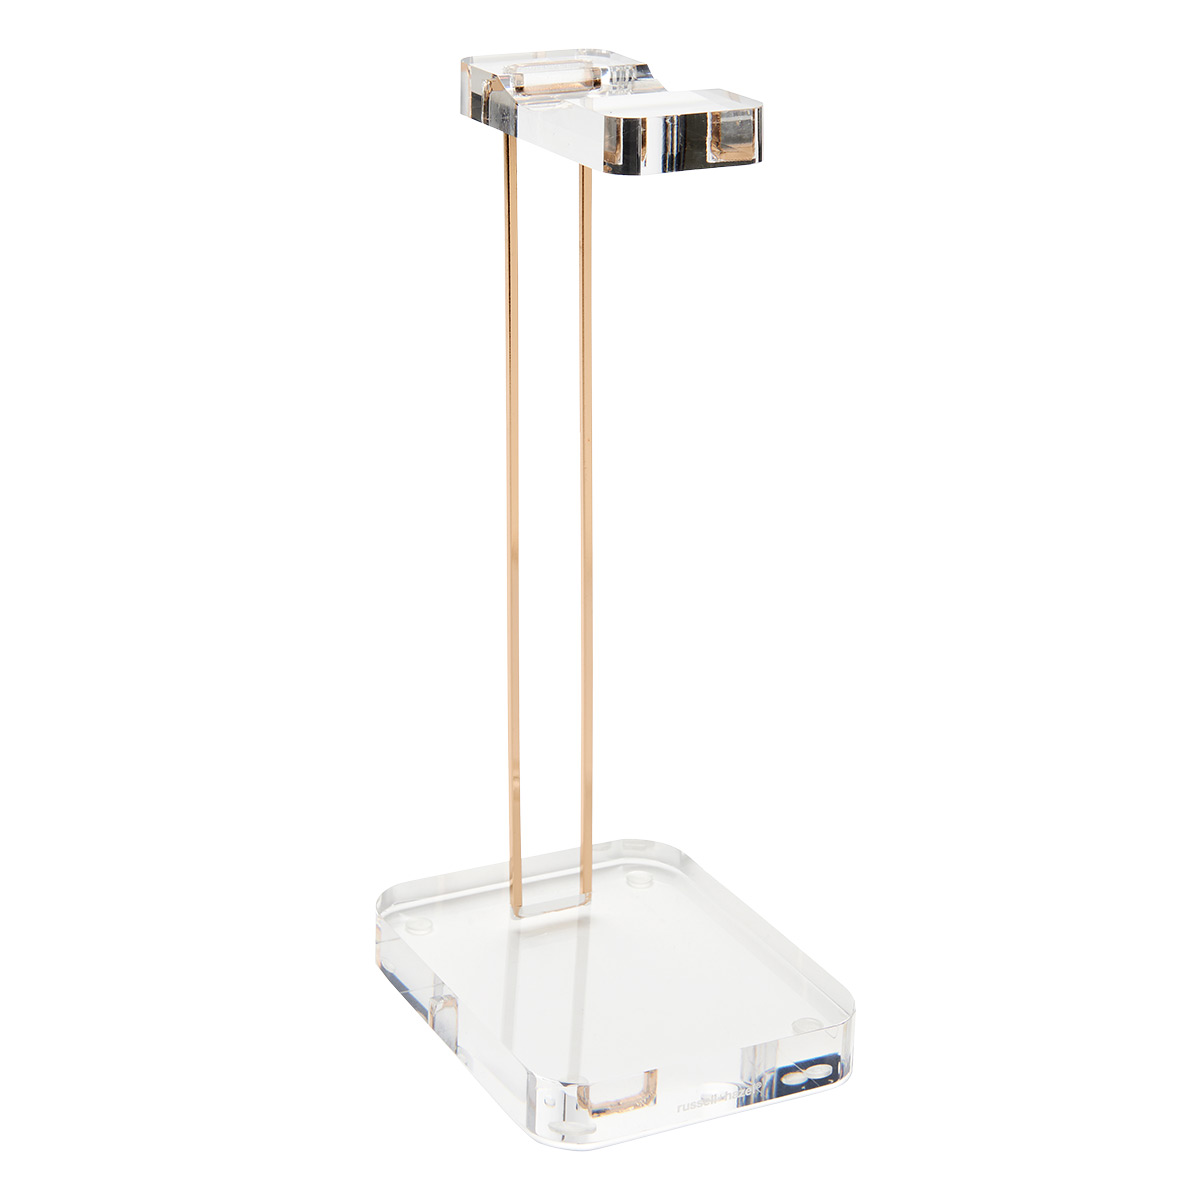 Russell Hazel Acrylic Headphone Stand | The Container Store